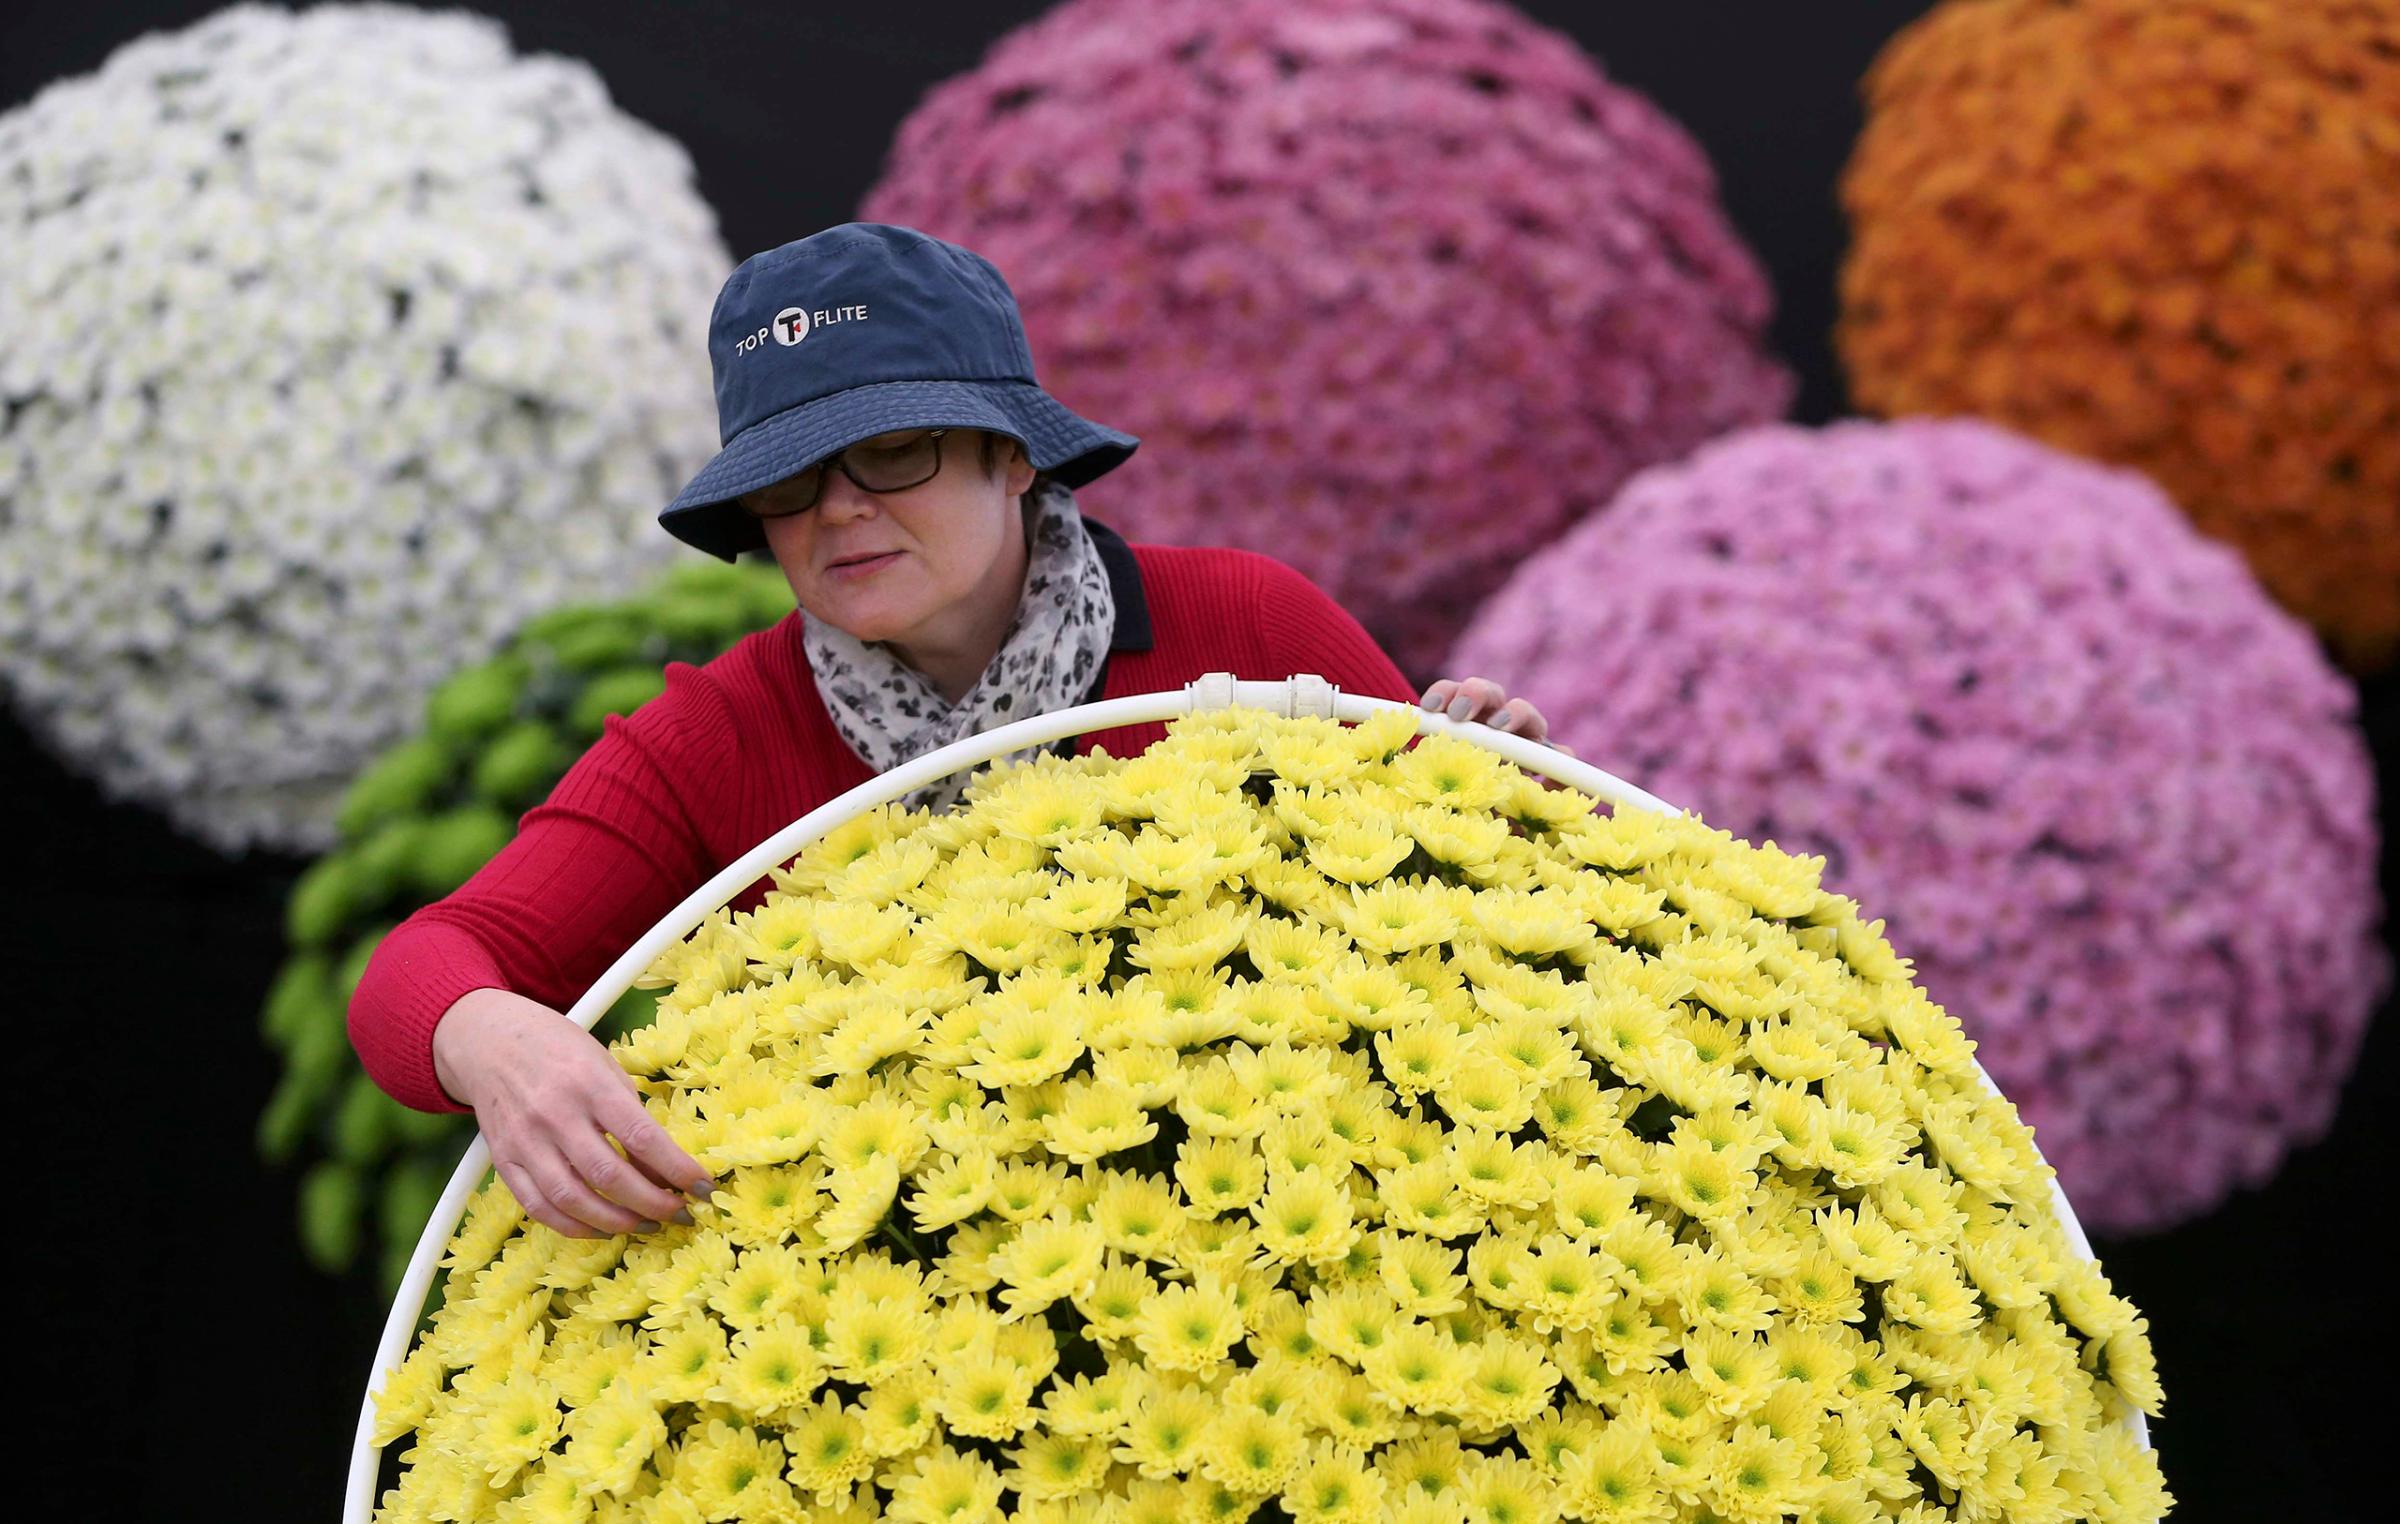 A woman adjusts display of chrysanthemums during preparations for the RHS Chelsea Flower Show in London, May 21, 2016.